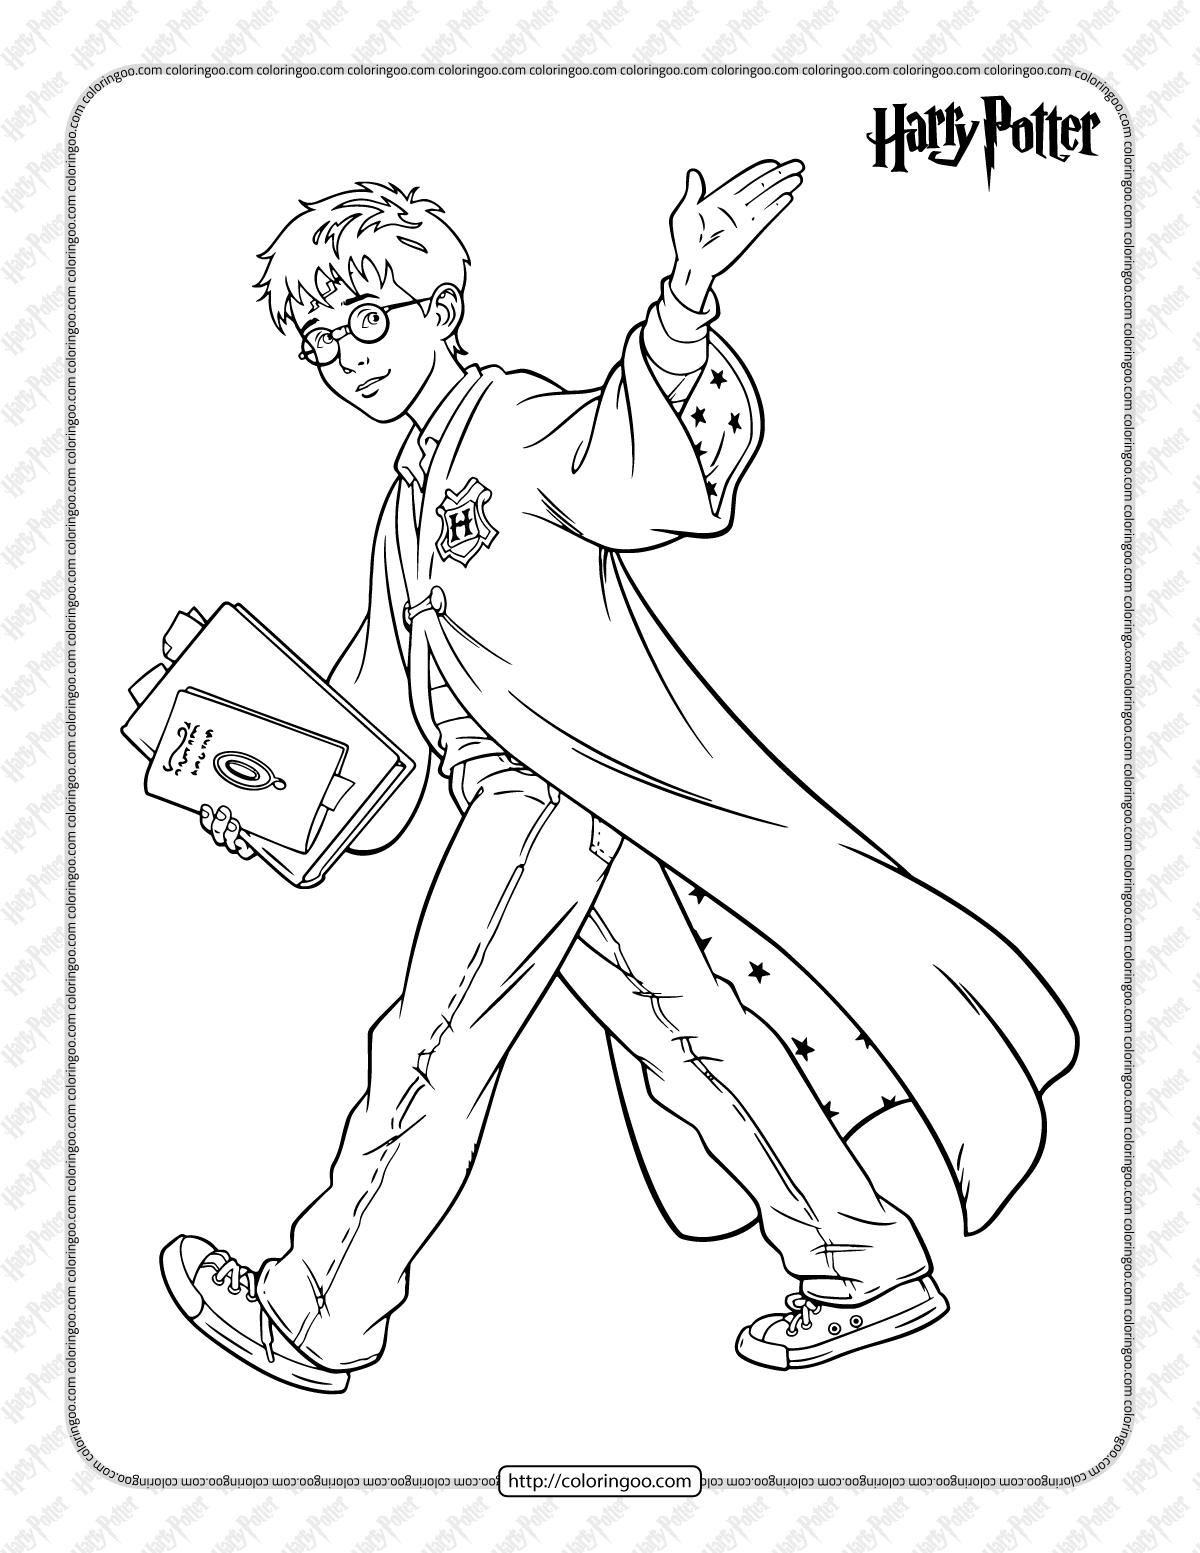 free printable harry potter pdf coloring book